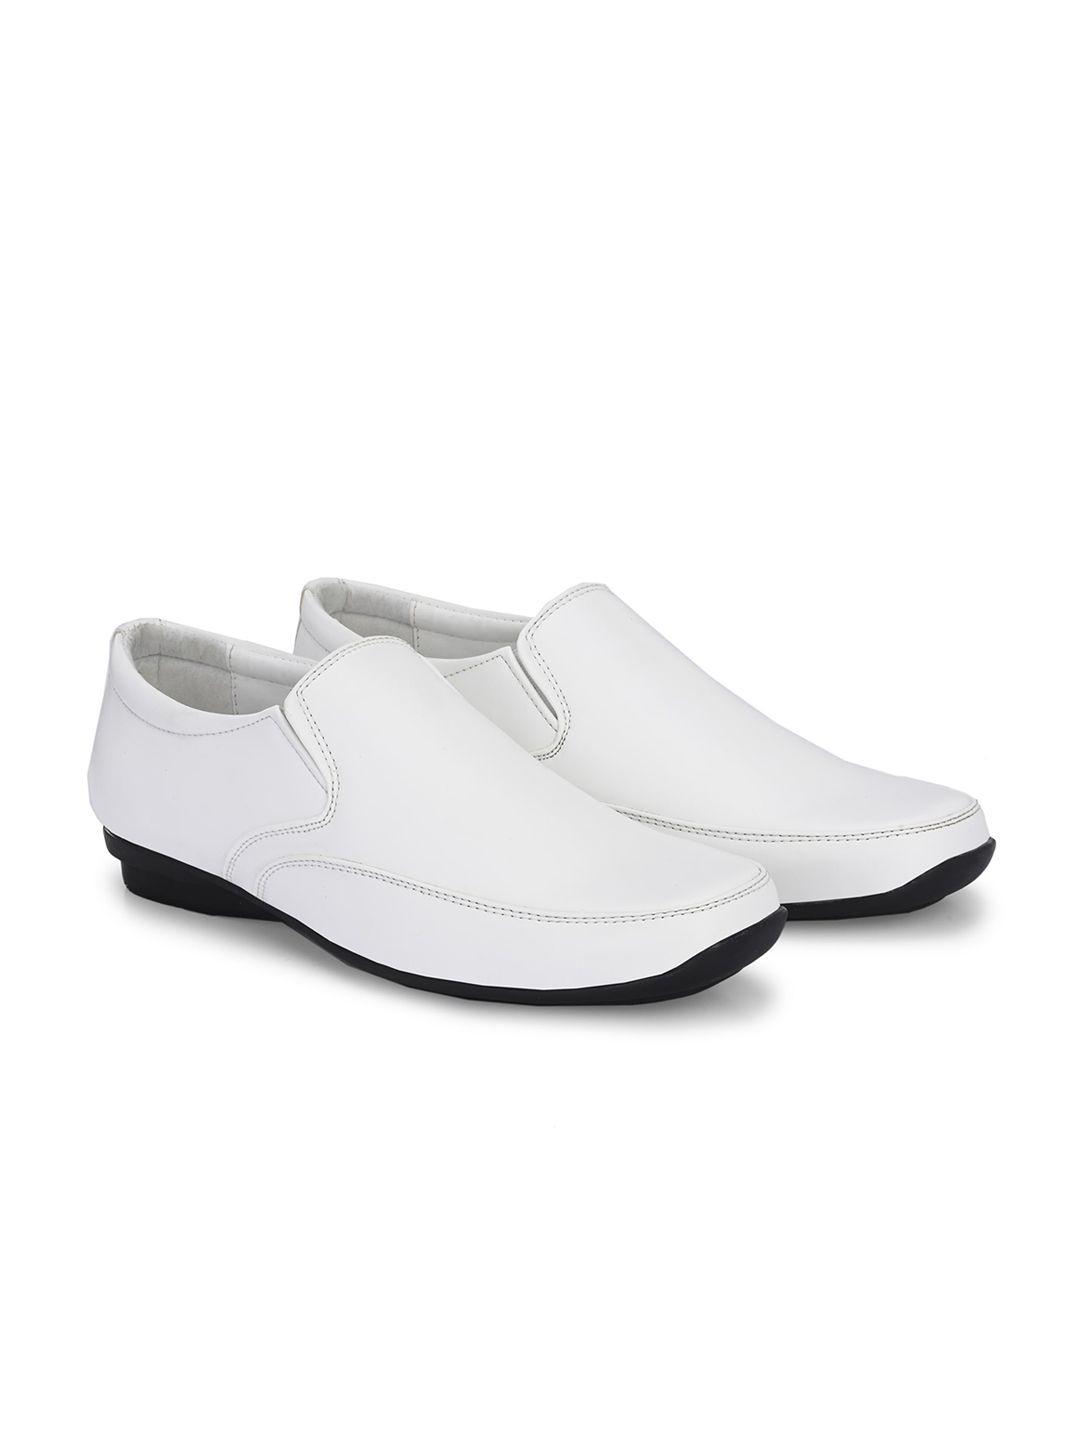 eego italy men padded formal slip on shoes